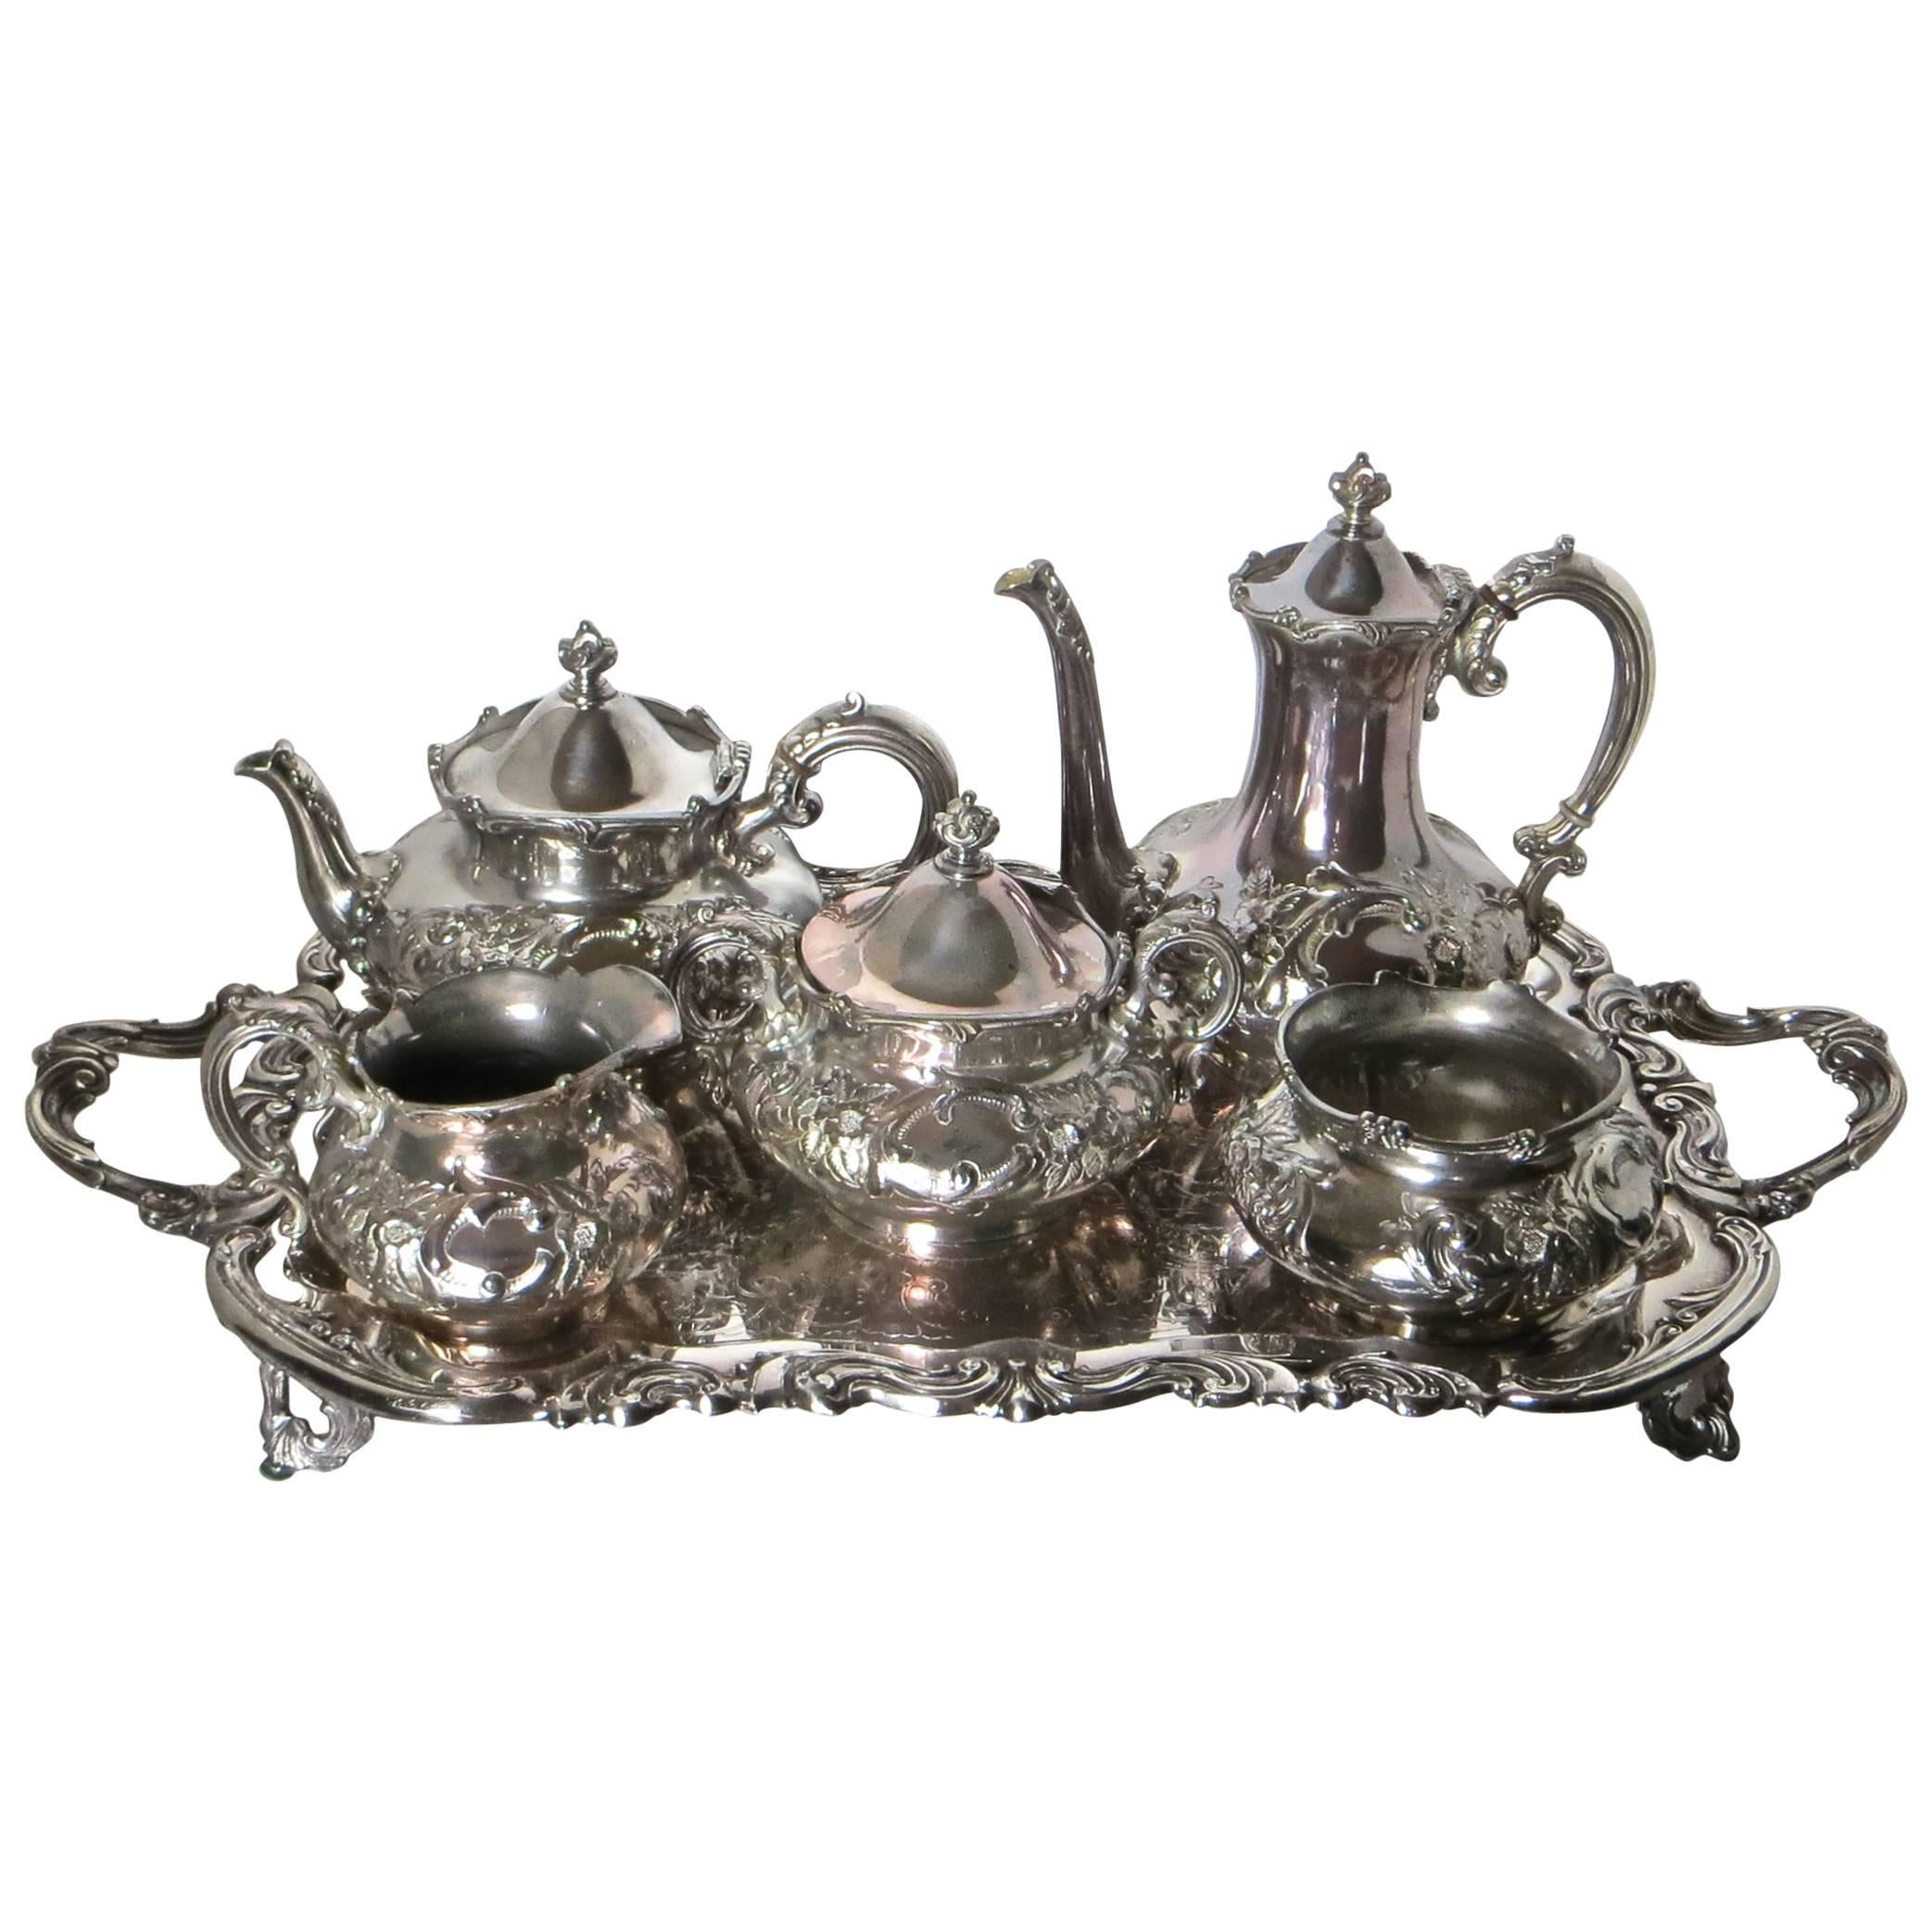 American Five-Piece Silver Plate Tea Service with Tray, Late 19th Century